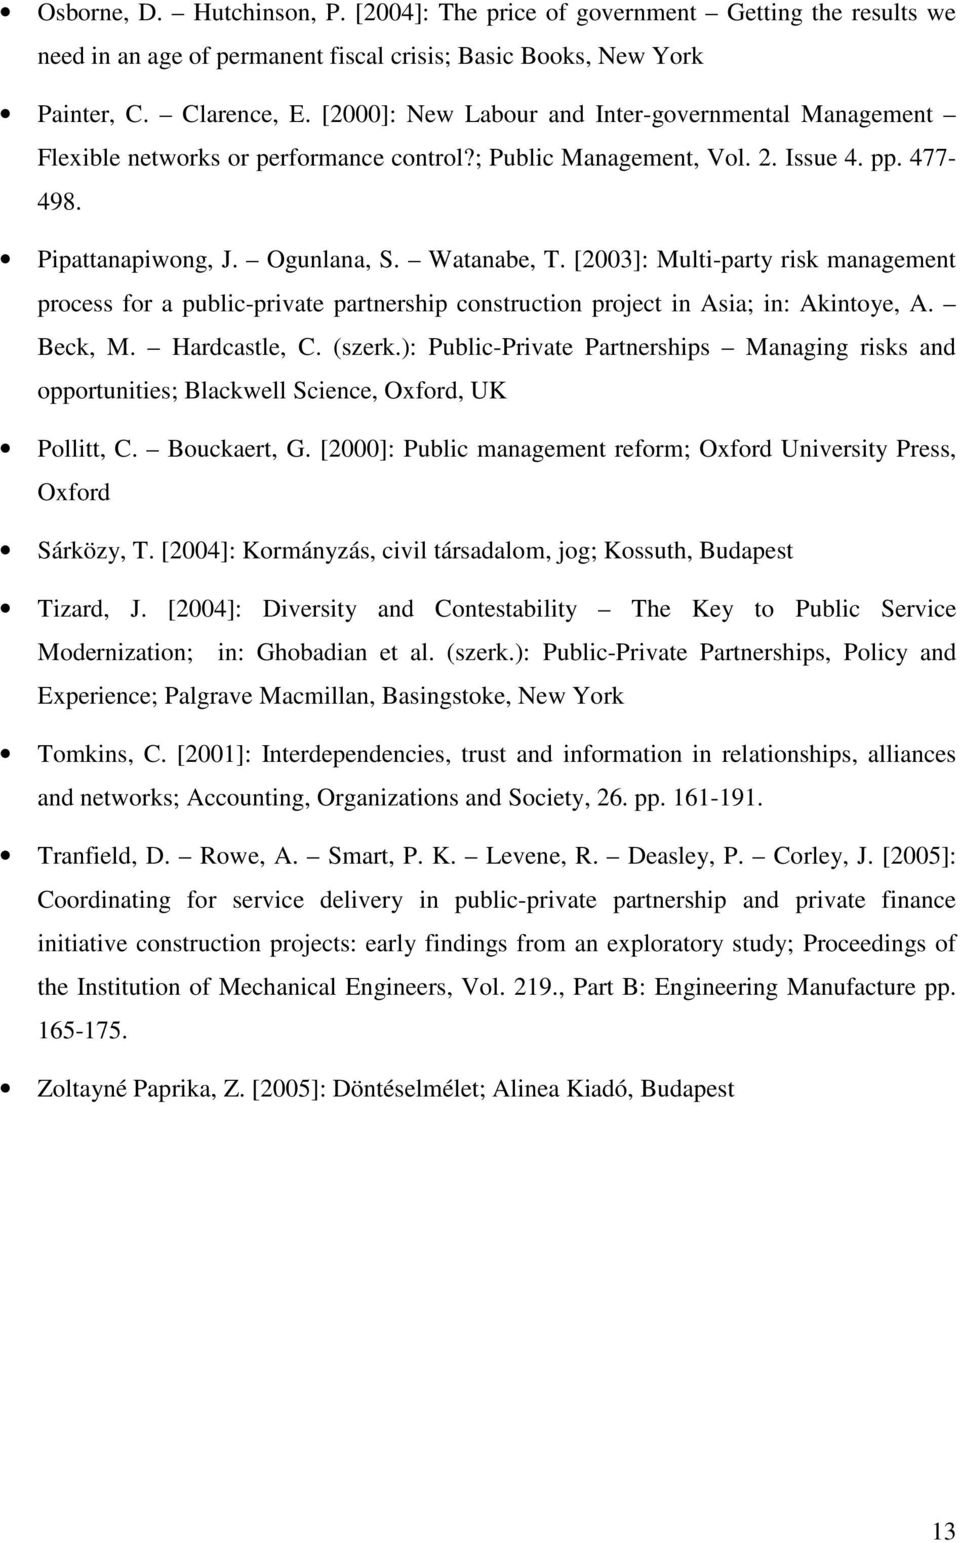 [2003]: Multi-party risk management process for a public-private partnership construction project in Asia; in: Akintoye, A. Beck, M. Hardcastle, C. (szerk.